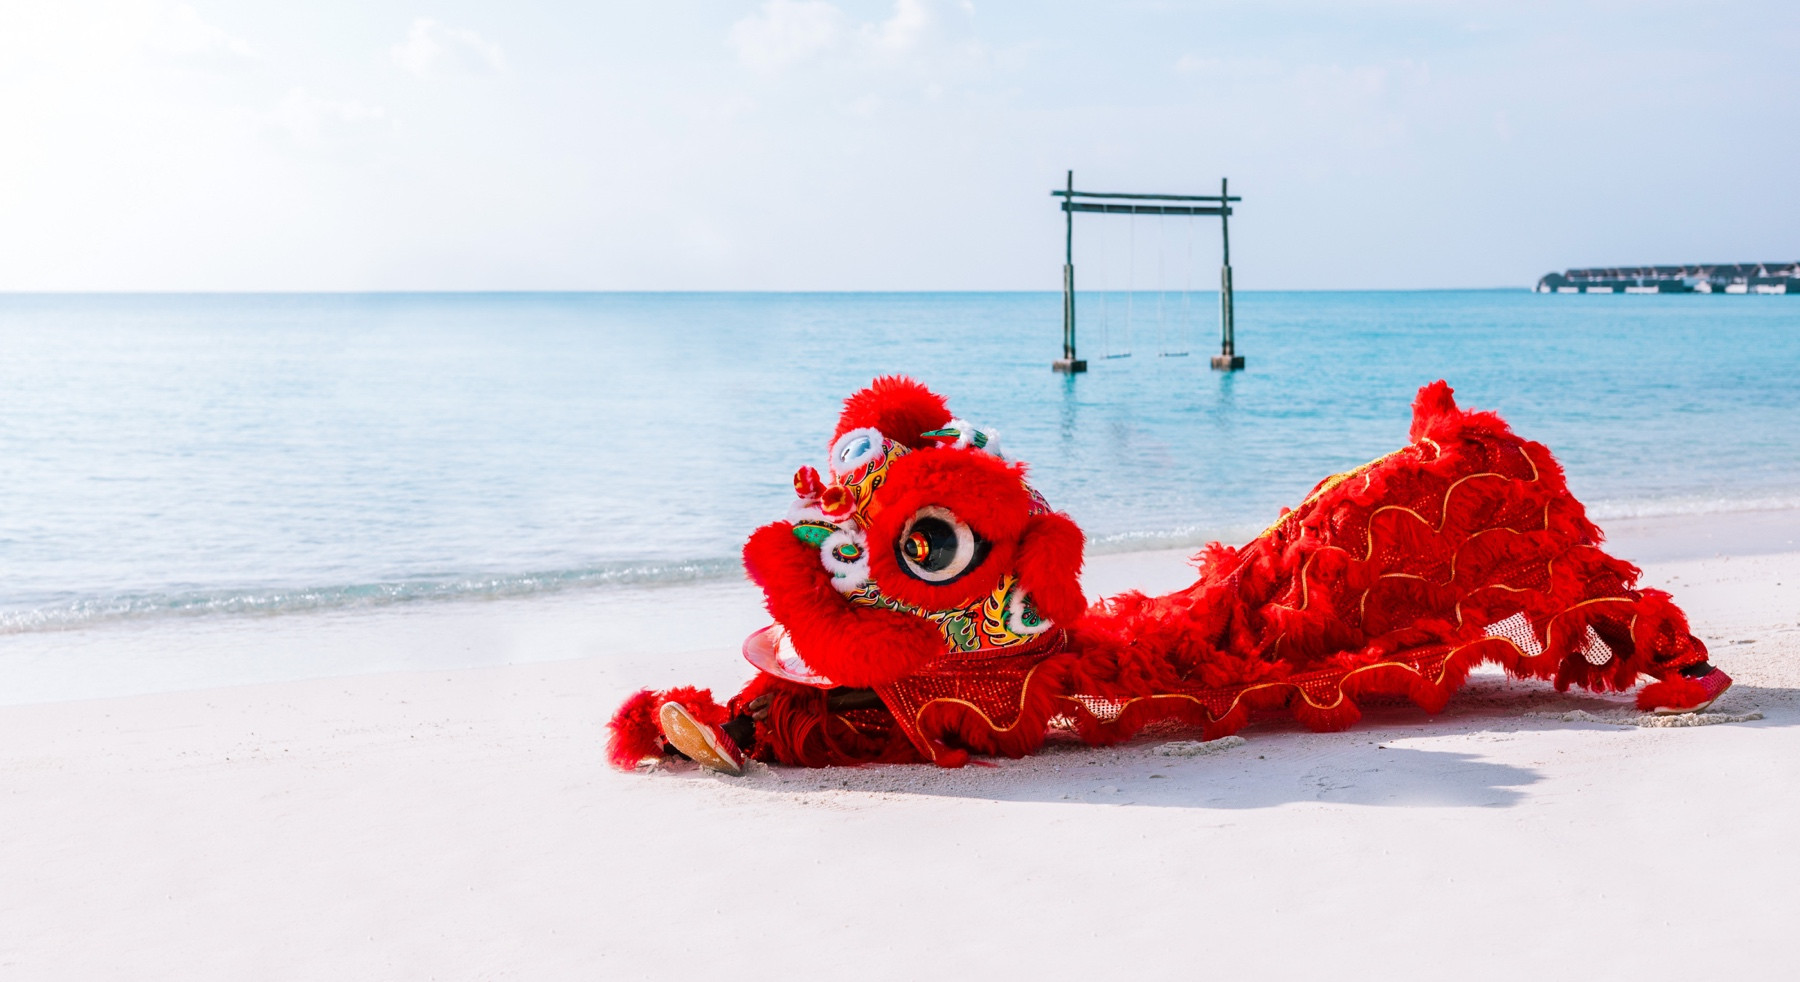 Fairmont Maldives Rings in the Year of the Wood Dragon with Extravagant Celebrations